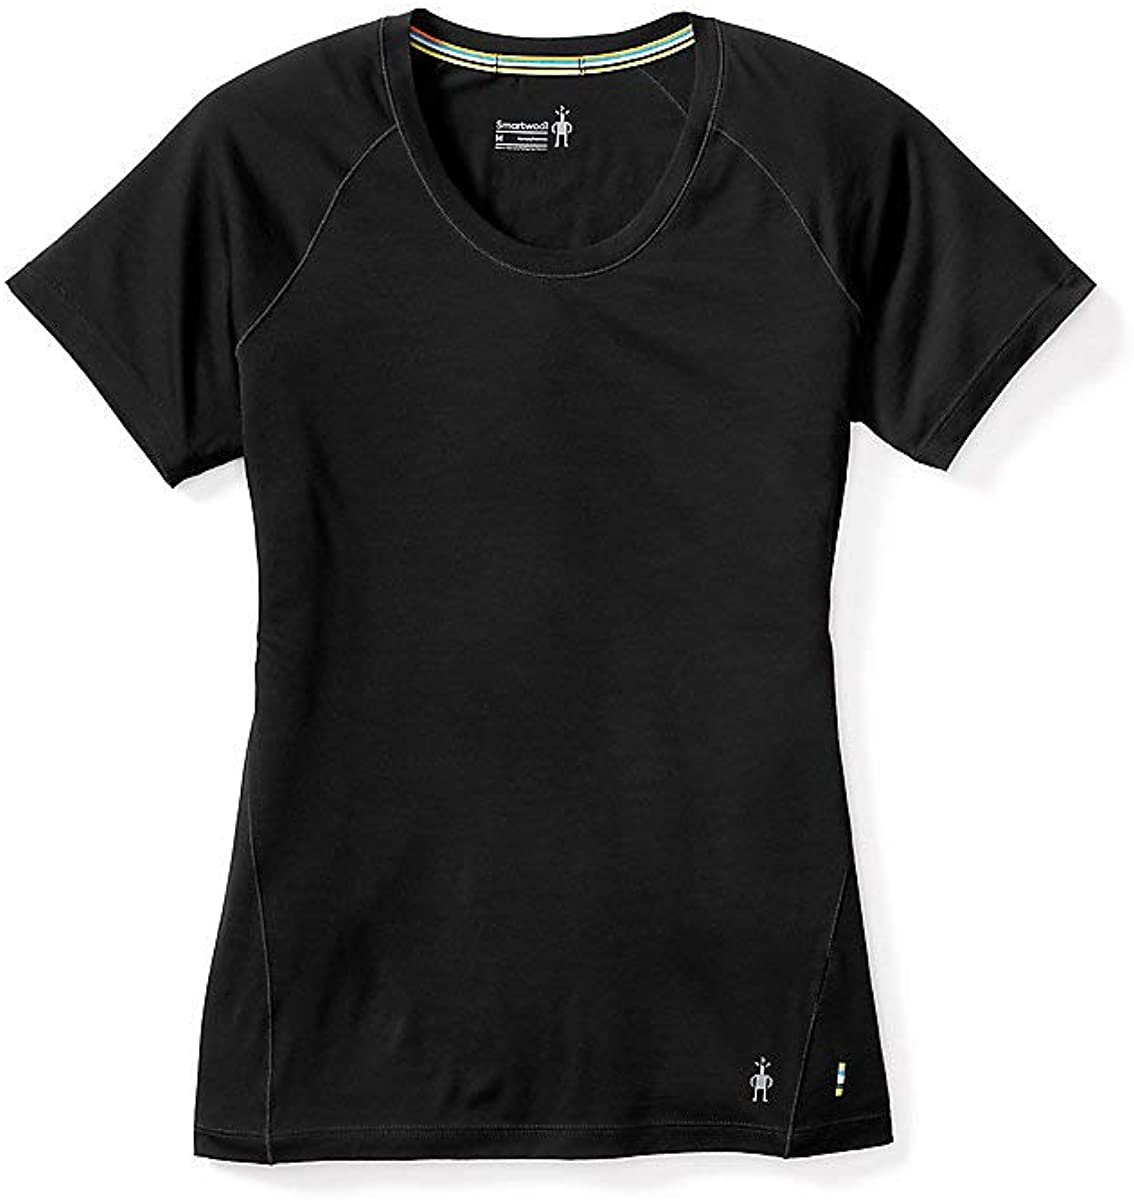 Women's Smartwool Merino 150 Base Layer Short Sleeve in Black from the side view